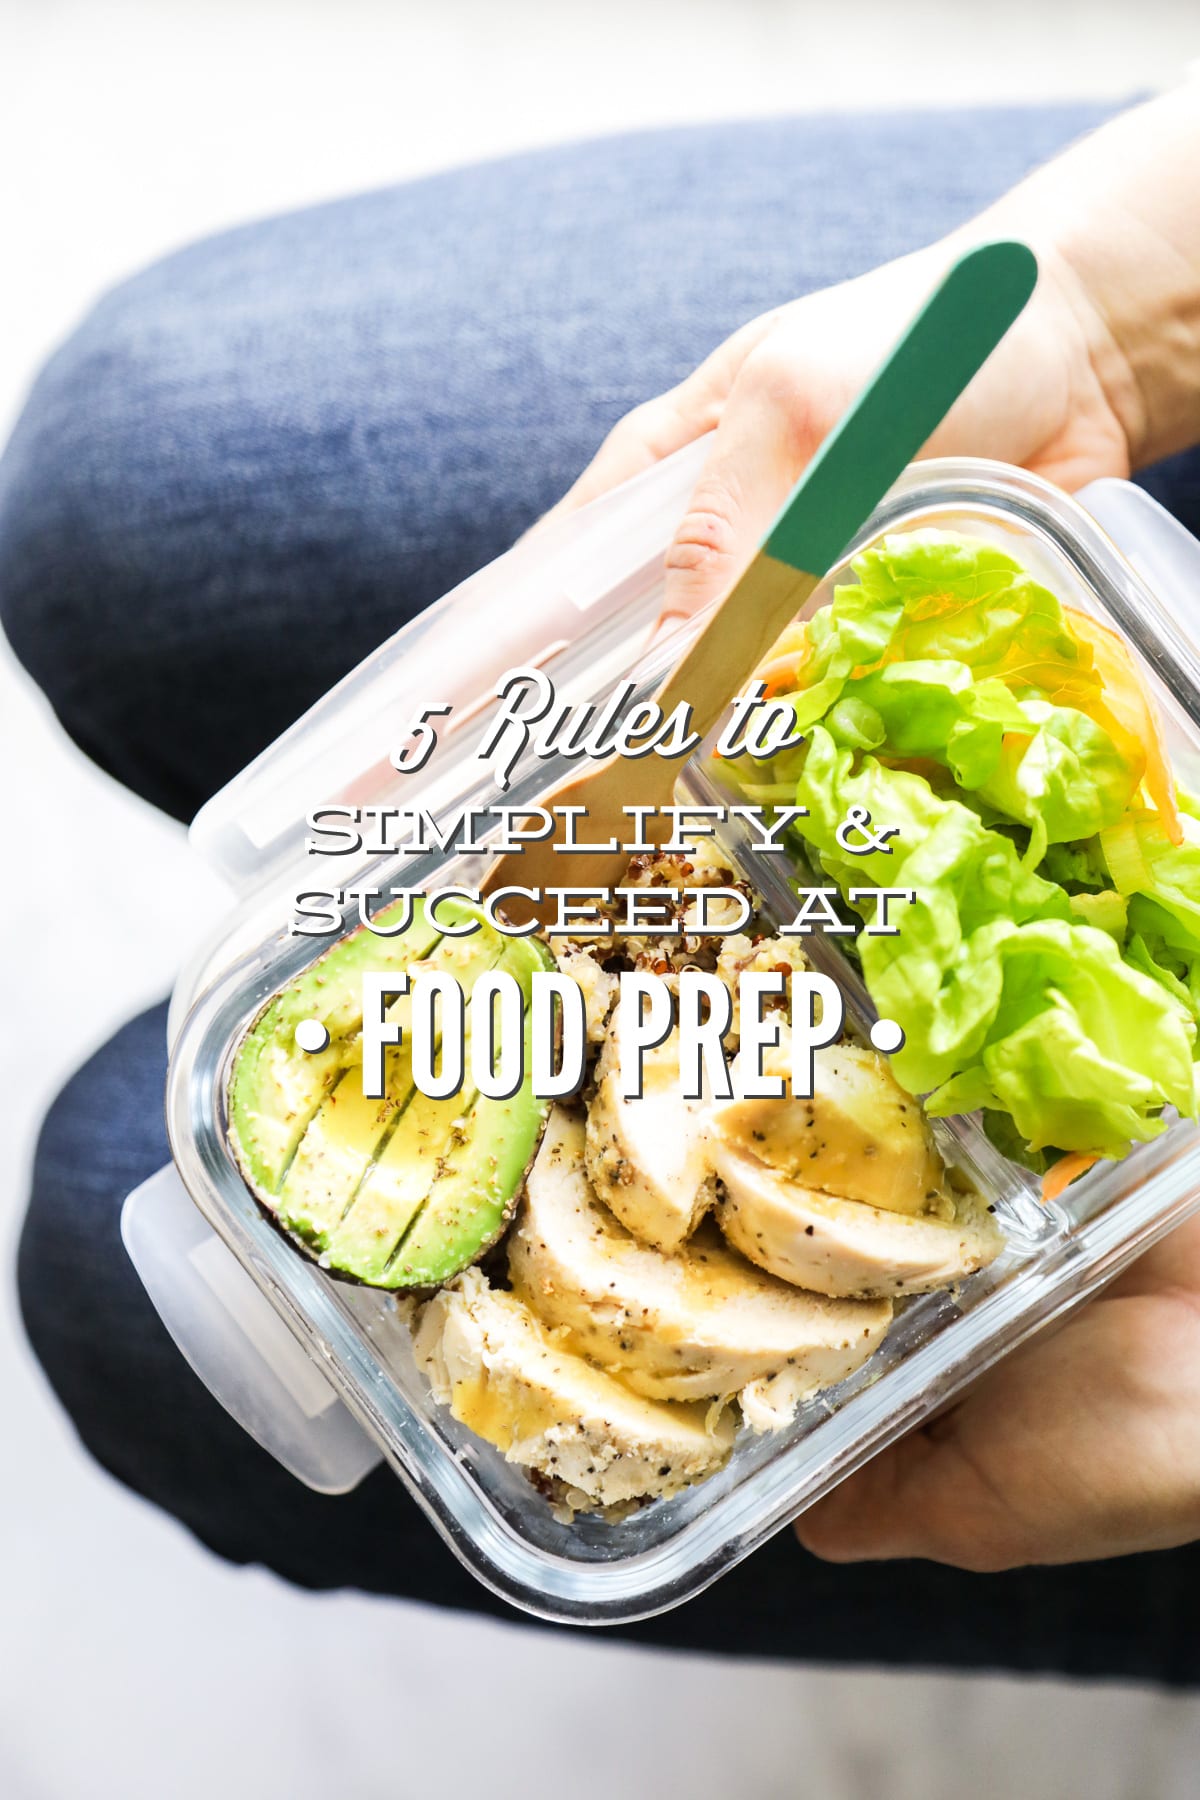 Real Food Prep: 5 Rules to Simplify and Succeed at Food Prep